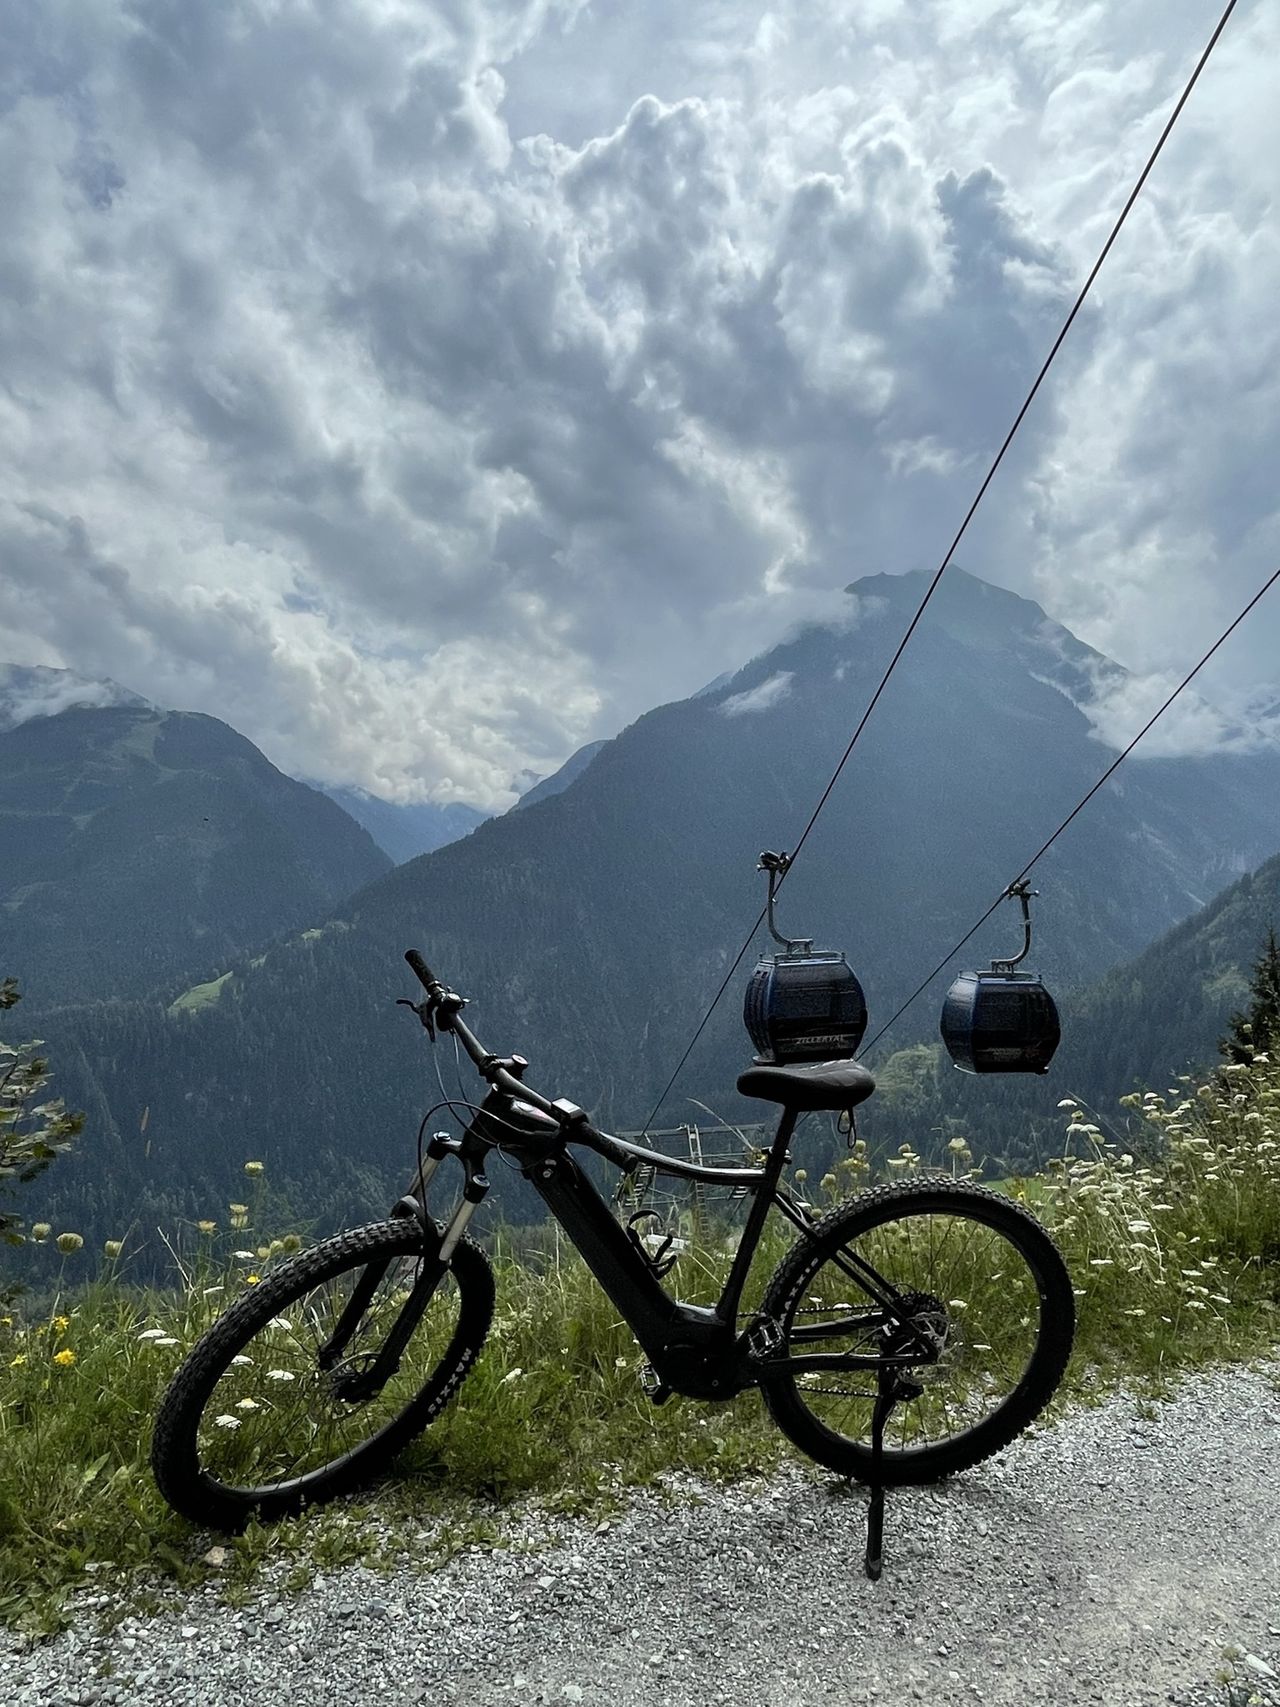 It's worth exploring the Zillertal Valley from the level of a bicycle.